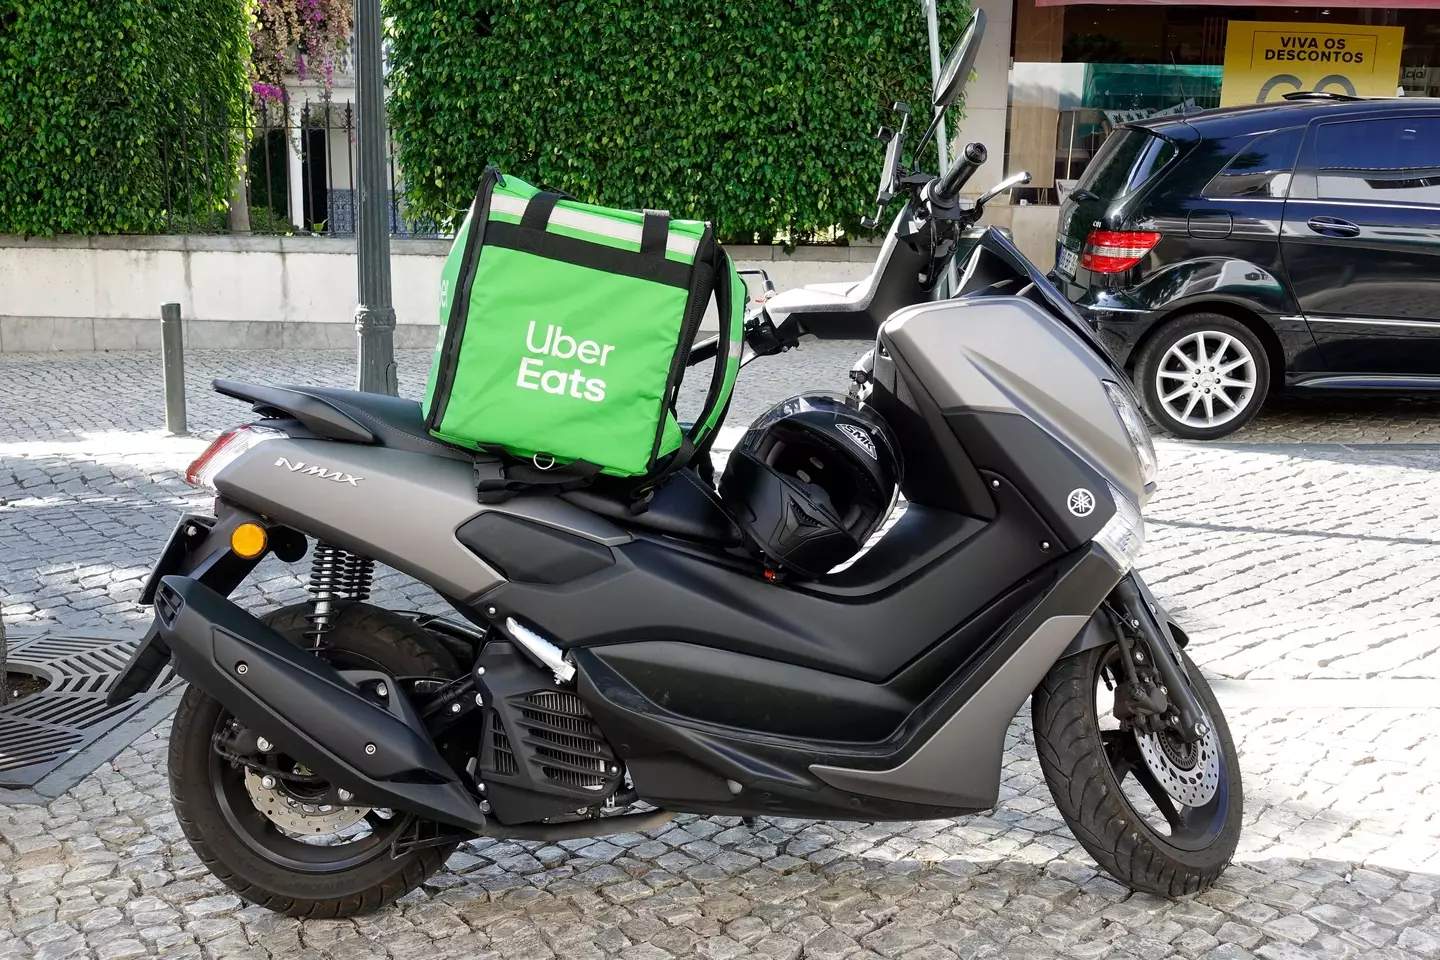 Uber Eats delivery.